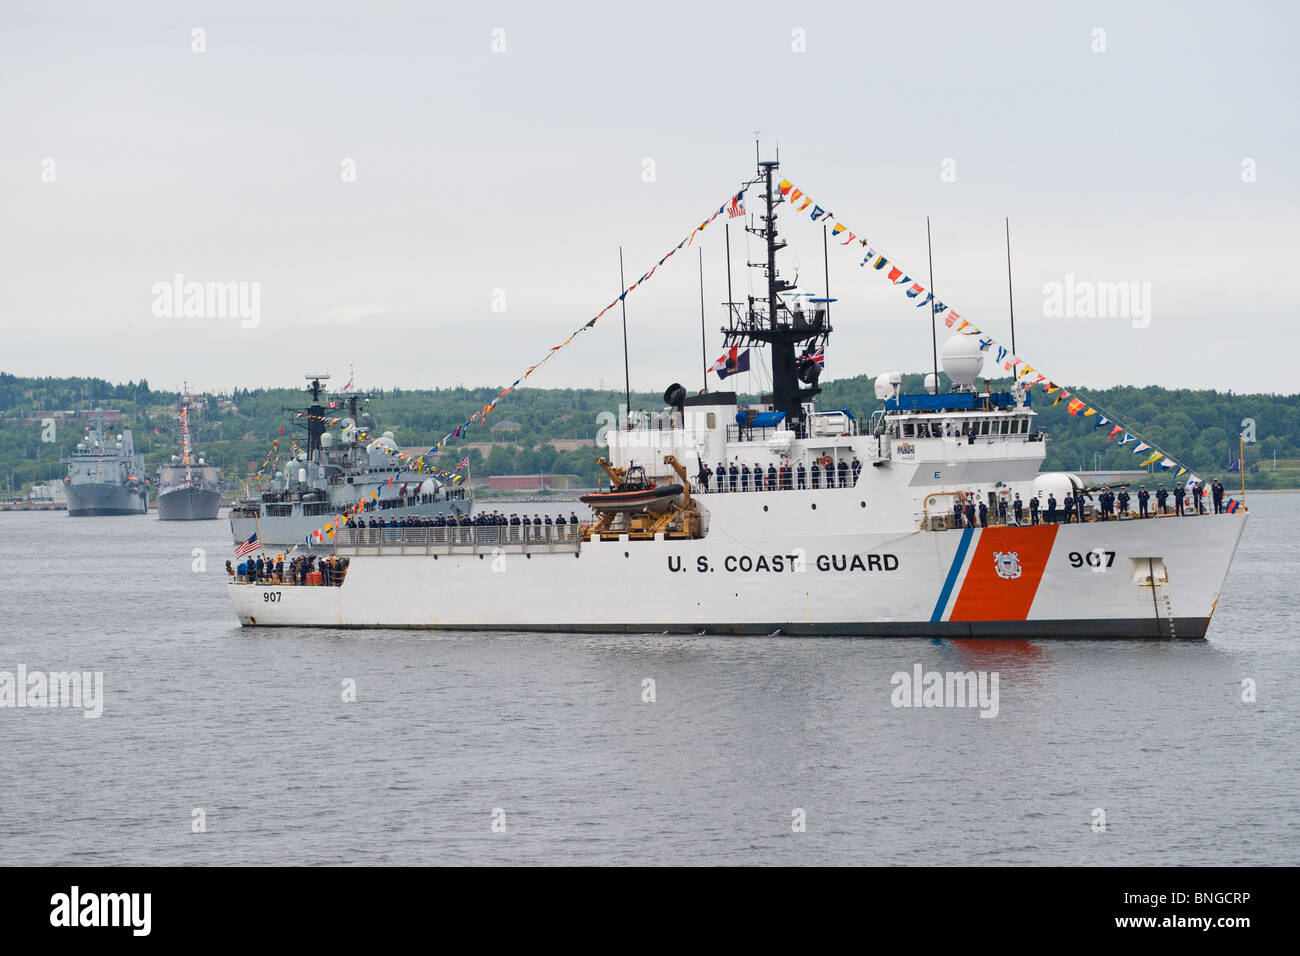 US Coast Guard cutter USCGC ESCANABA sits at anchor during the 2010 Fleet Review in Halifax, Nova Scotia. Stock Photo